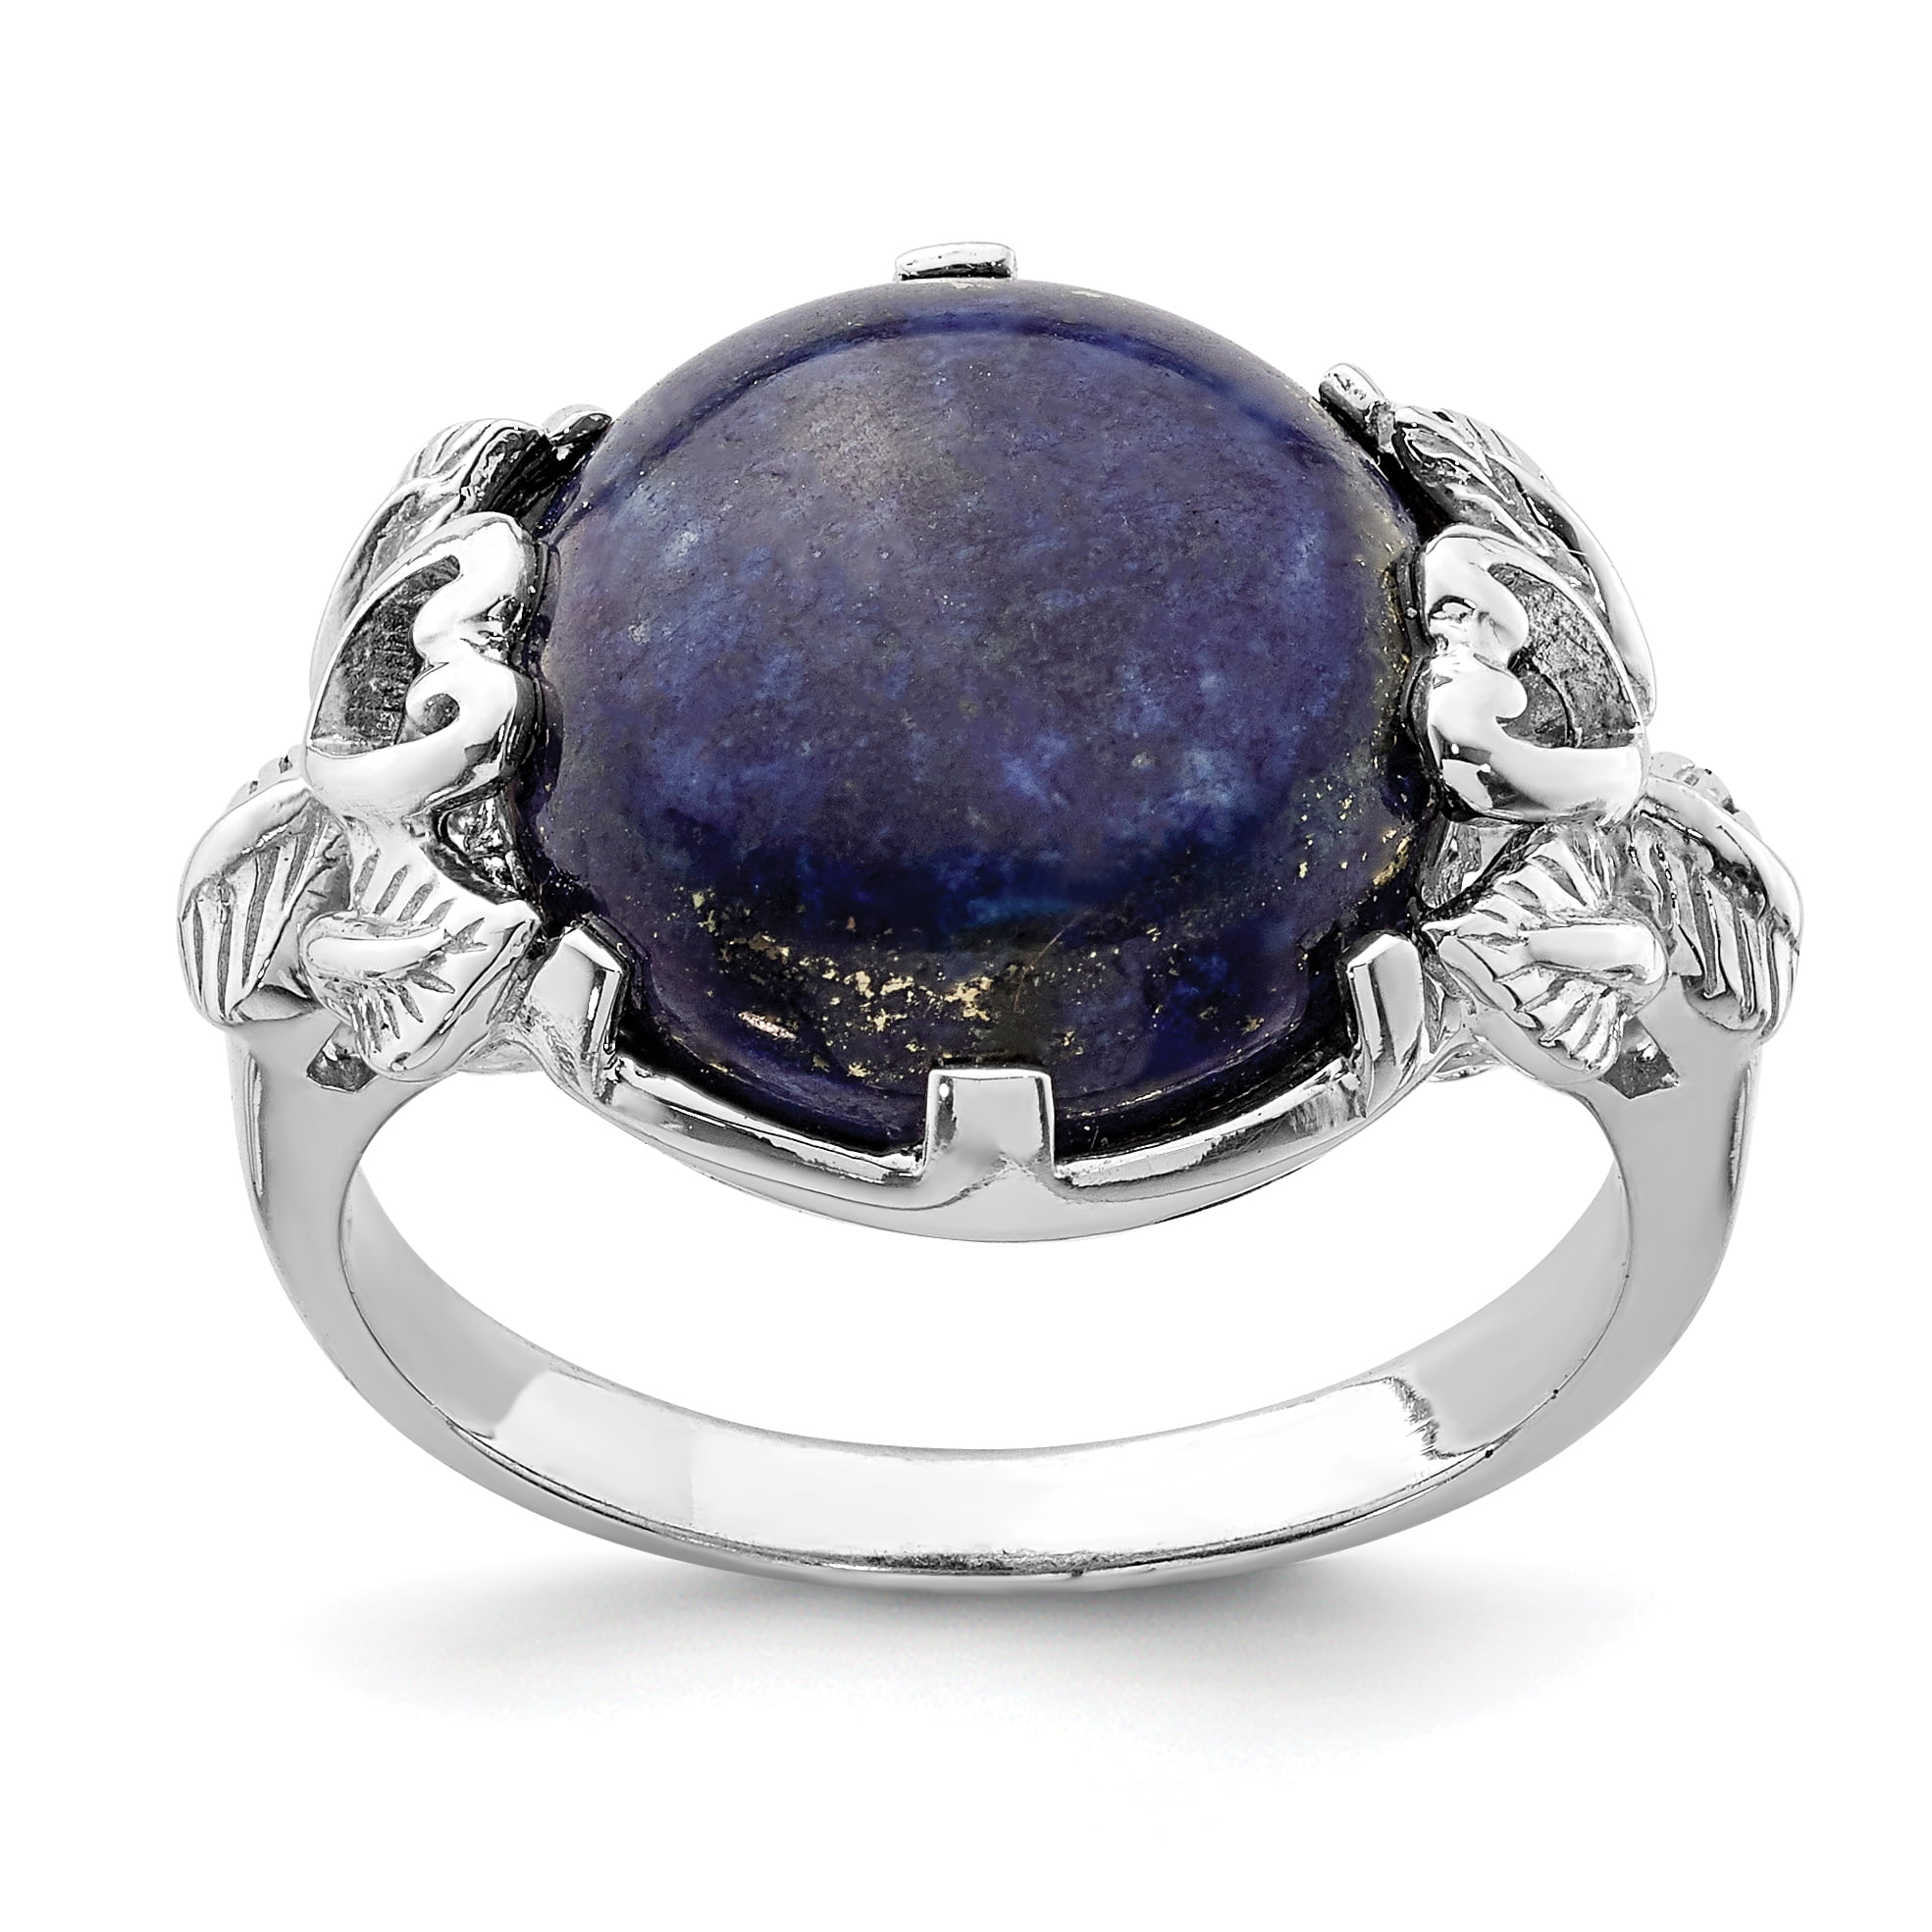 4.80 Ct Tanzanite Cab Gemstone 925 Silver Solitaire Stackable Women Band Ring 